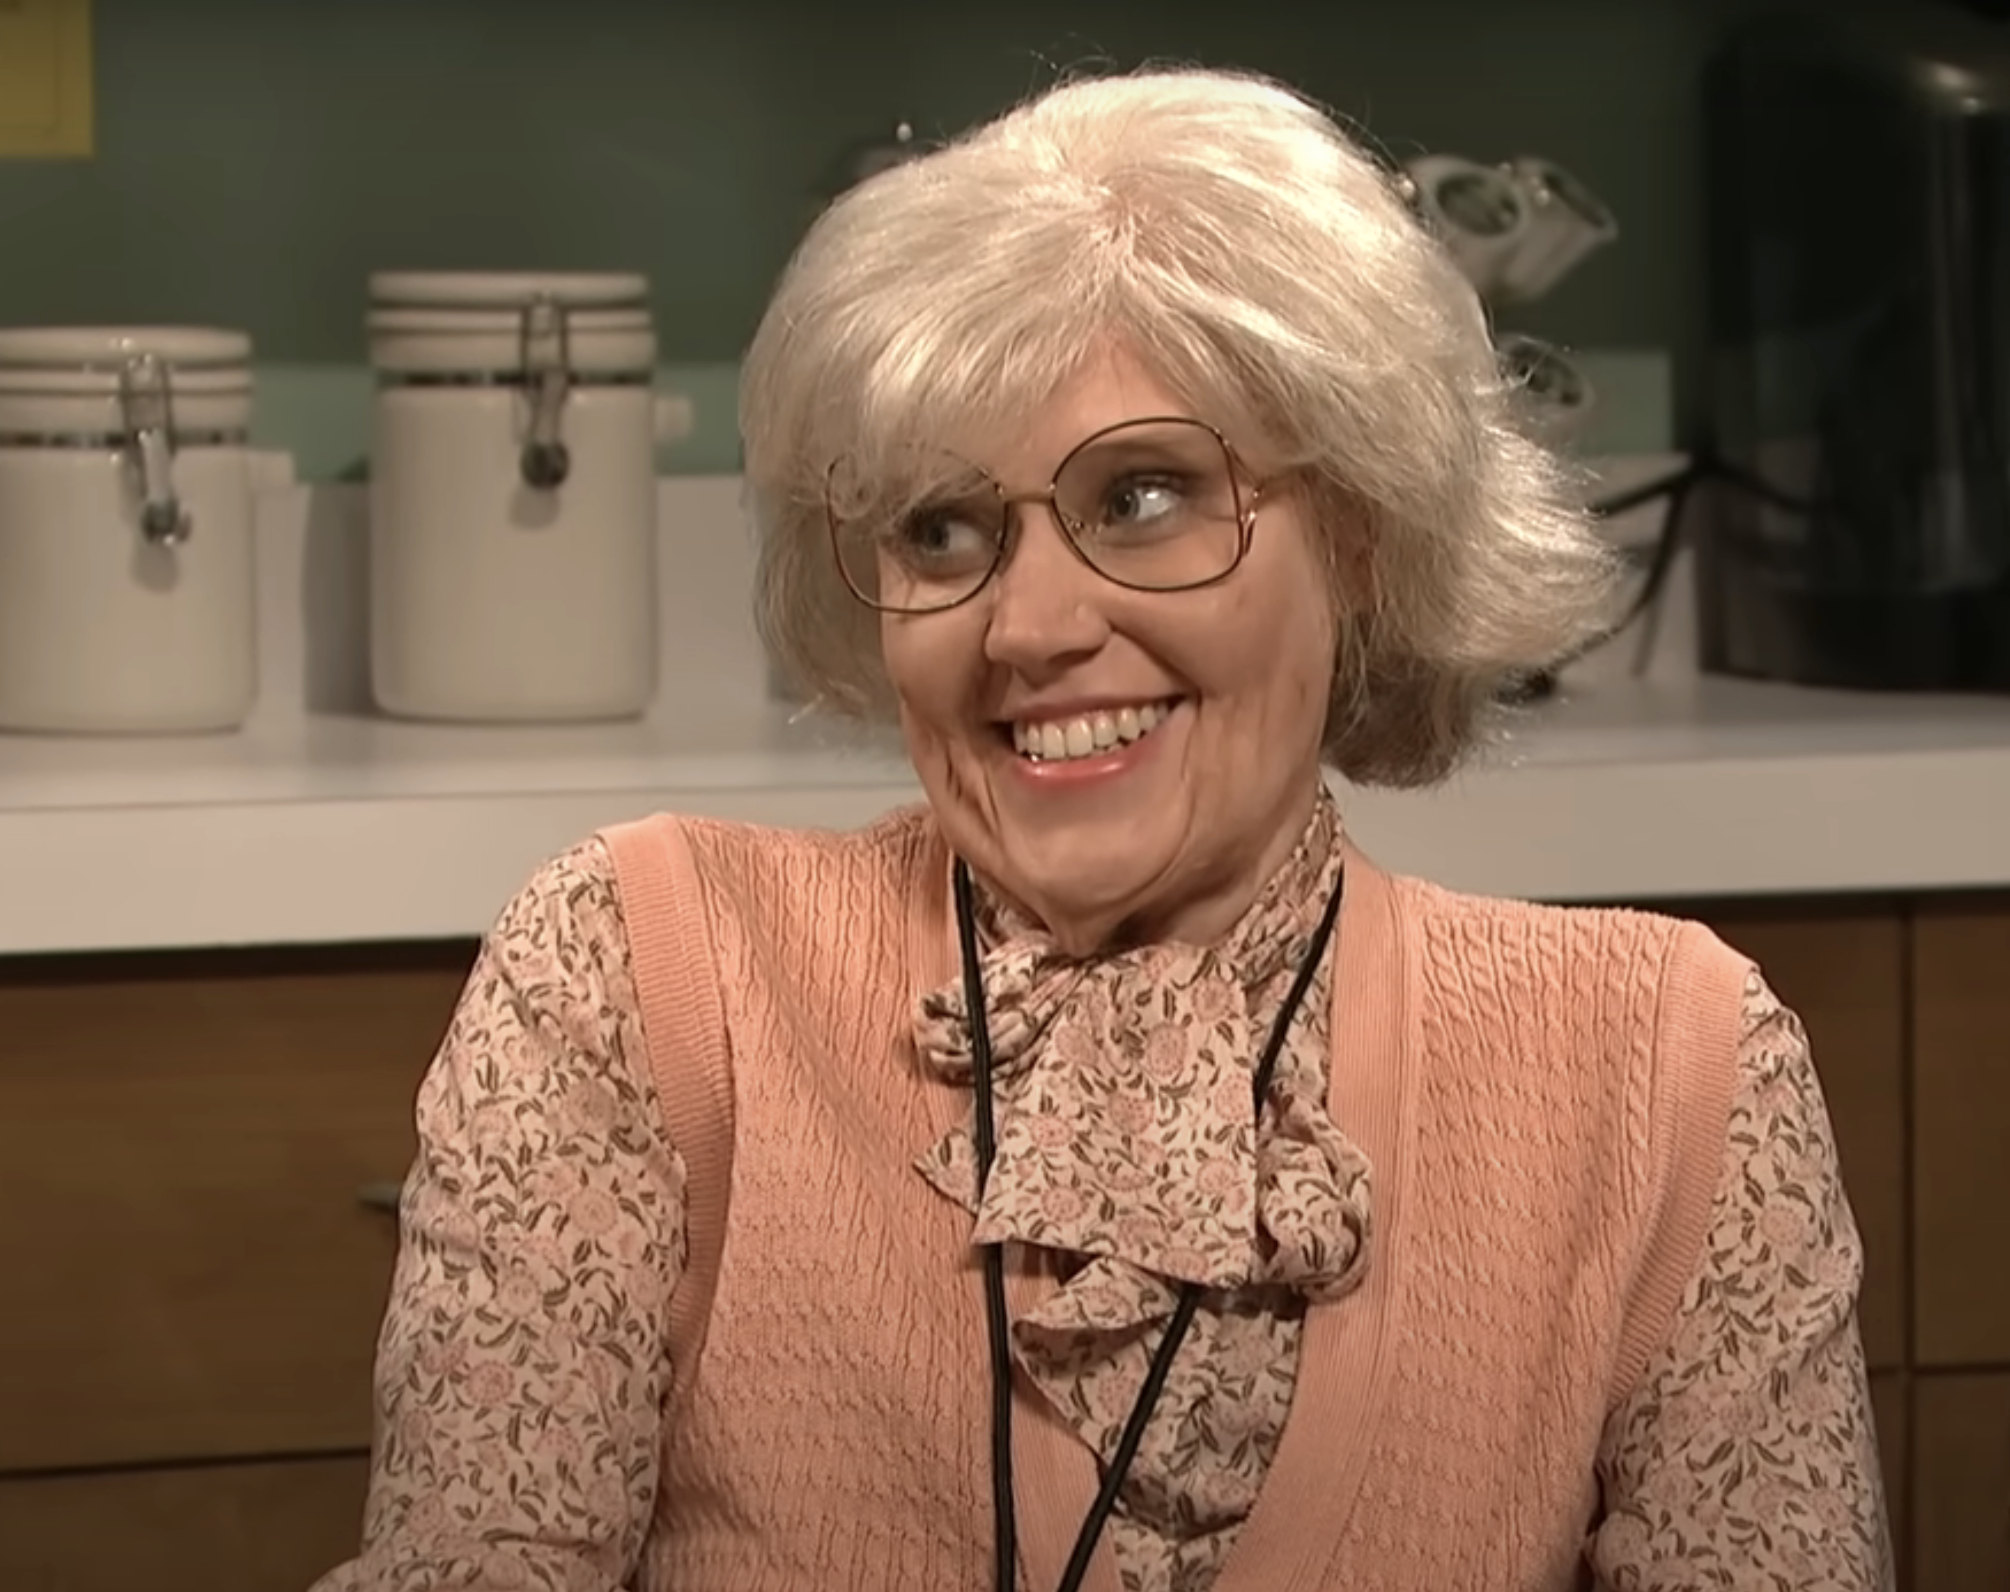 Kate McKinnon as an older lady with glasses wearing a floral shirt, sweater vest, and pearl necklace in a kitchen set